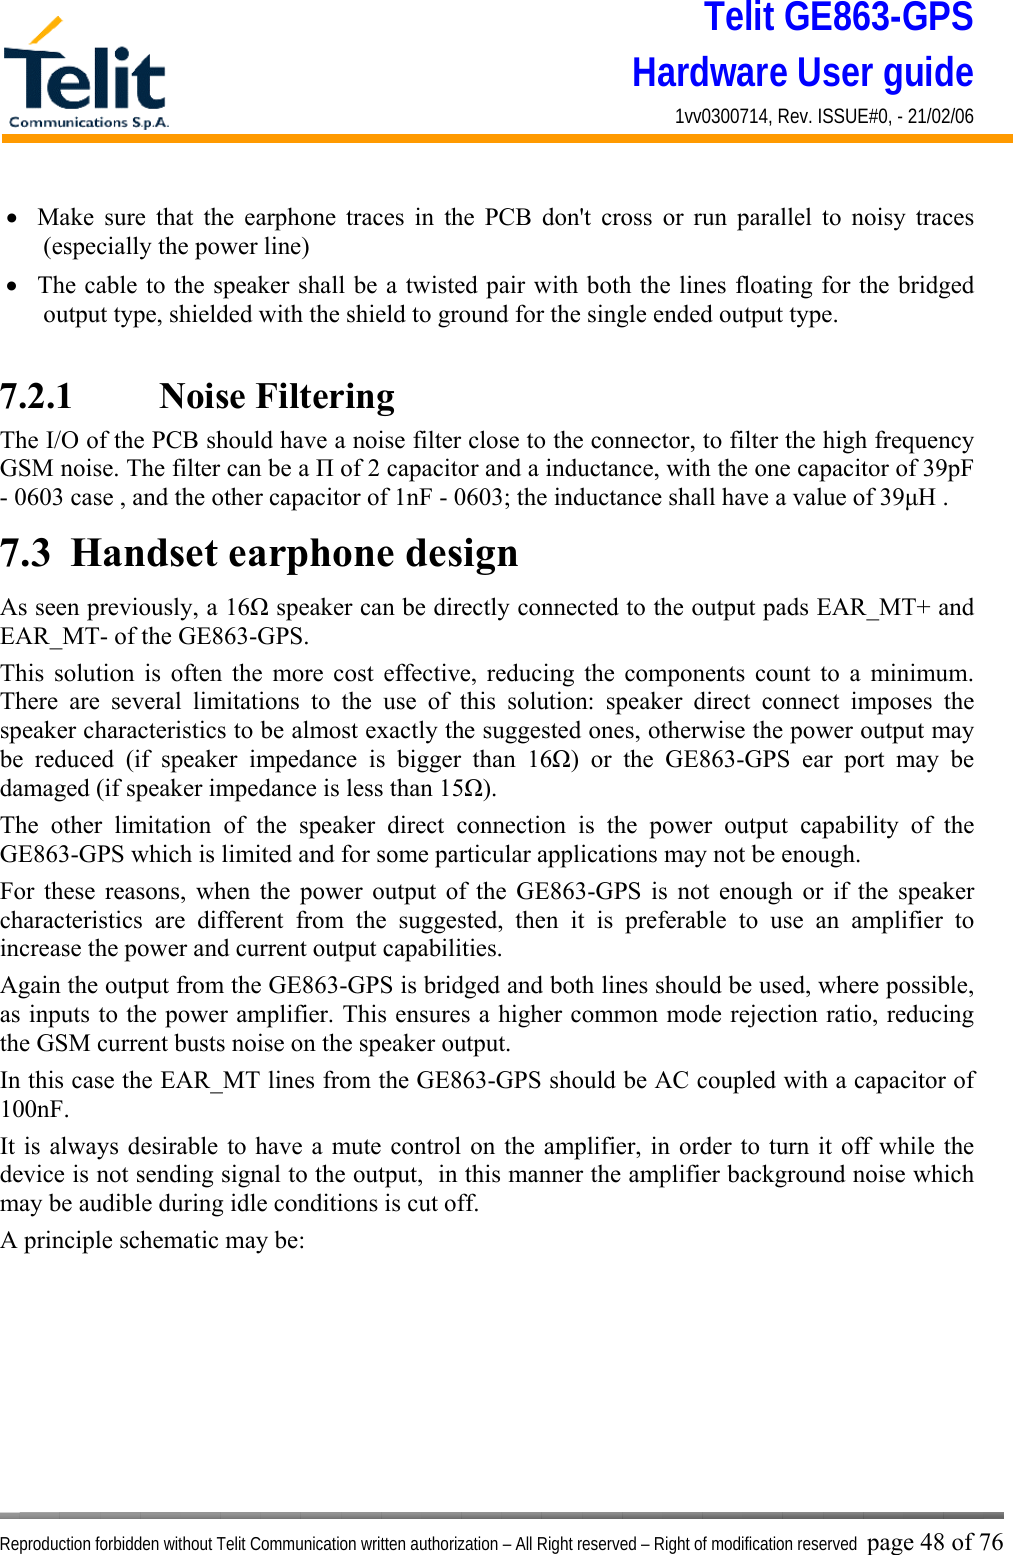 Telit GE863-GPS Hardware User guide 1vv0300714, Rev. ISSUE#0, - 21/02/06    Reproduction forbidden without Telit Communication written authorization – All Right reserved – Right of modification reserved page 48 of 76 •  Make sure that the earphone traces in the PCB don&apos;t cross or run parallel to noisy traces (especially the power line)  •  The cable to the speaker shall be a twisted pair with both the lines floating for the bridged output type, shielded with the shield to ground for the single ended output type.  7.2.1    Noise Filtering The I/O of the PCB should have a noise filter close to the connector, to filter the high frequency GSM noise. The filter can be a Π of 2 capacitor and a inductance, with the one capacitor of 39pF - 0603 case , and the other capacitor of 1nF - 0603; the inductance shall have a value of 39μH . 7.3  Handset earphone design As seen previously, a 16Ω speaker can be directly connected to the output pads EAR_MT+ and EAR_MT- of the GE863-GPS. This solution is often the more cost effective, reducing the components count to a minimum. There are several limitations to the use of this solution: speaker direct connect imposes the speaker characteristics to be almost exactly the suggested ones, otherwise the power output may be reduced (if speaker impedance is bigger than 16Ω) or the GE863-GPS ear port may be damaged (if speaker impedance is less than 15Ω). The other limitation of the speaker direct connection is the power output capability of the GE863-GPS which is limited and for some particular applications may not be enough. For these reasons, when the power output of the GE863-GPS is not enough or if the speaker characteristics are different from the suggested, then it is preferable to use an amplifier to increase the power and current output capabilities.  Again the output from the GE863-GPS is bridged and both lines should be used, where possible, as inputs to the power amplifier. This ensures a higher common mode rejection ratio, reducing the GSM current busts noise on the speaker output. In this case the EAR_MT lines from the GE863-GPS should be AC coupled with a capacitor of 100nF. It is always desirable to have a mute control on the amplifier, in order to turn it off while the device is not sending signal to the output,  in this manner the amplifier background noise which may be audible during idle conditions is cut off. A principle schematic may be: 